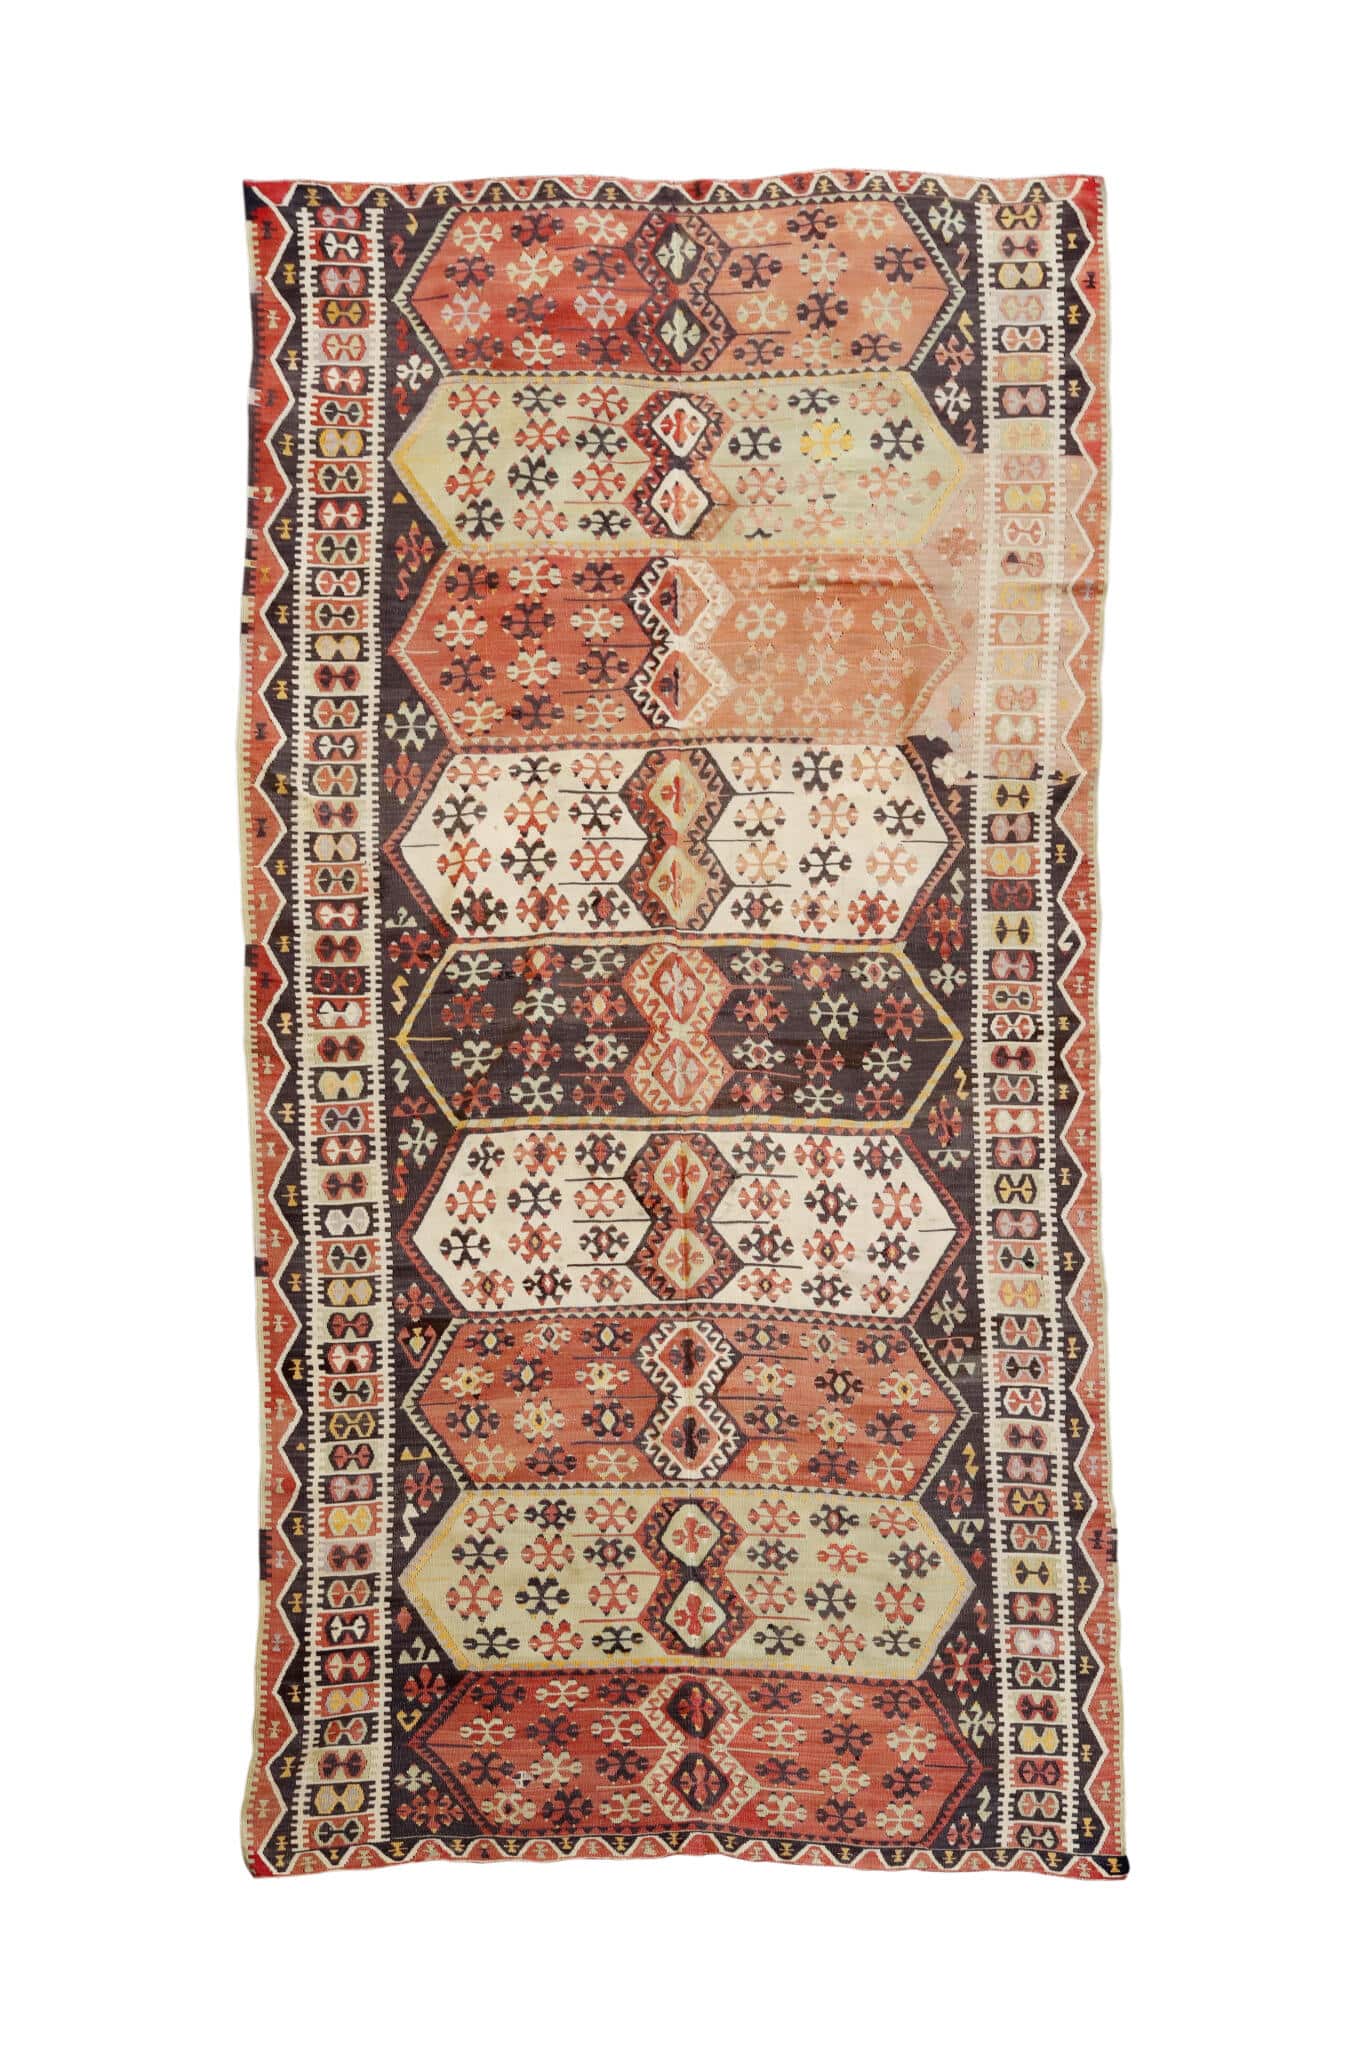 wool woven old antique turkish rug